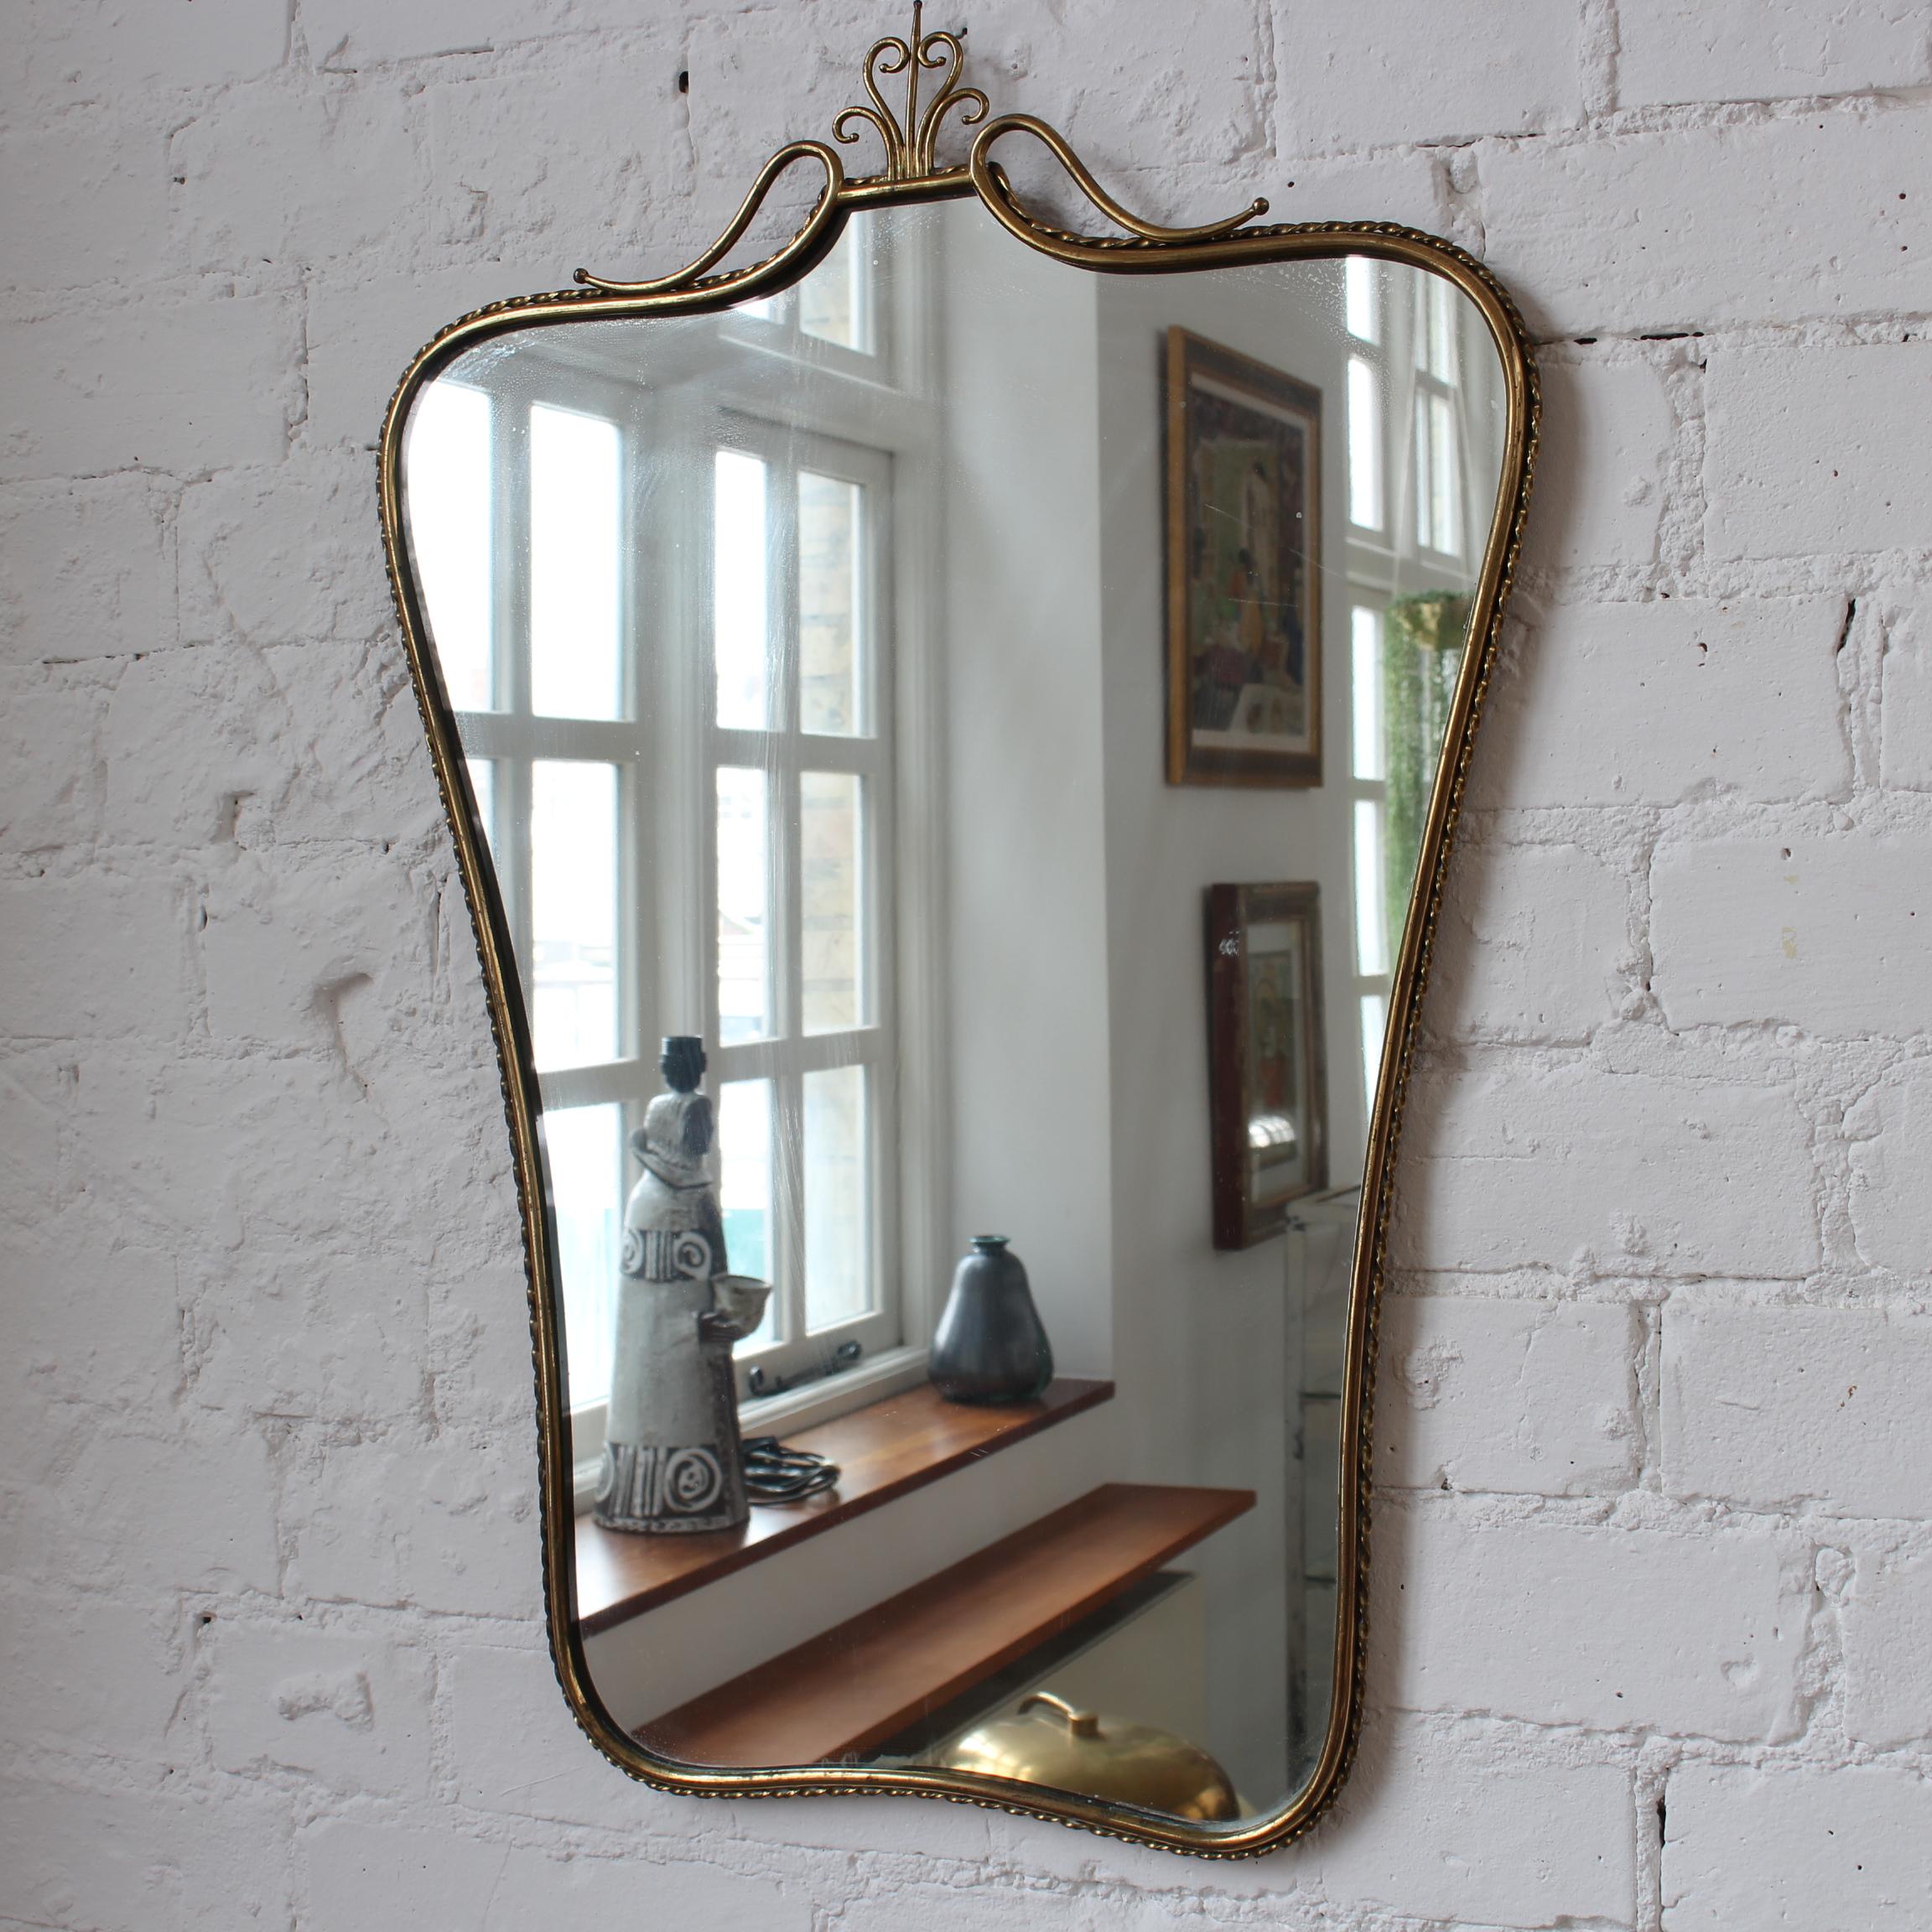 Mid-Century Italian wall mirror with brass frame and top flourish (circa 1960s). This mirror is simply elegant and characterful in a modern, Gio Ponti style. It is classically-shaped presenting a charming top flourish in the form of a decorative